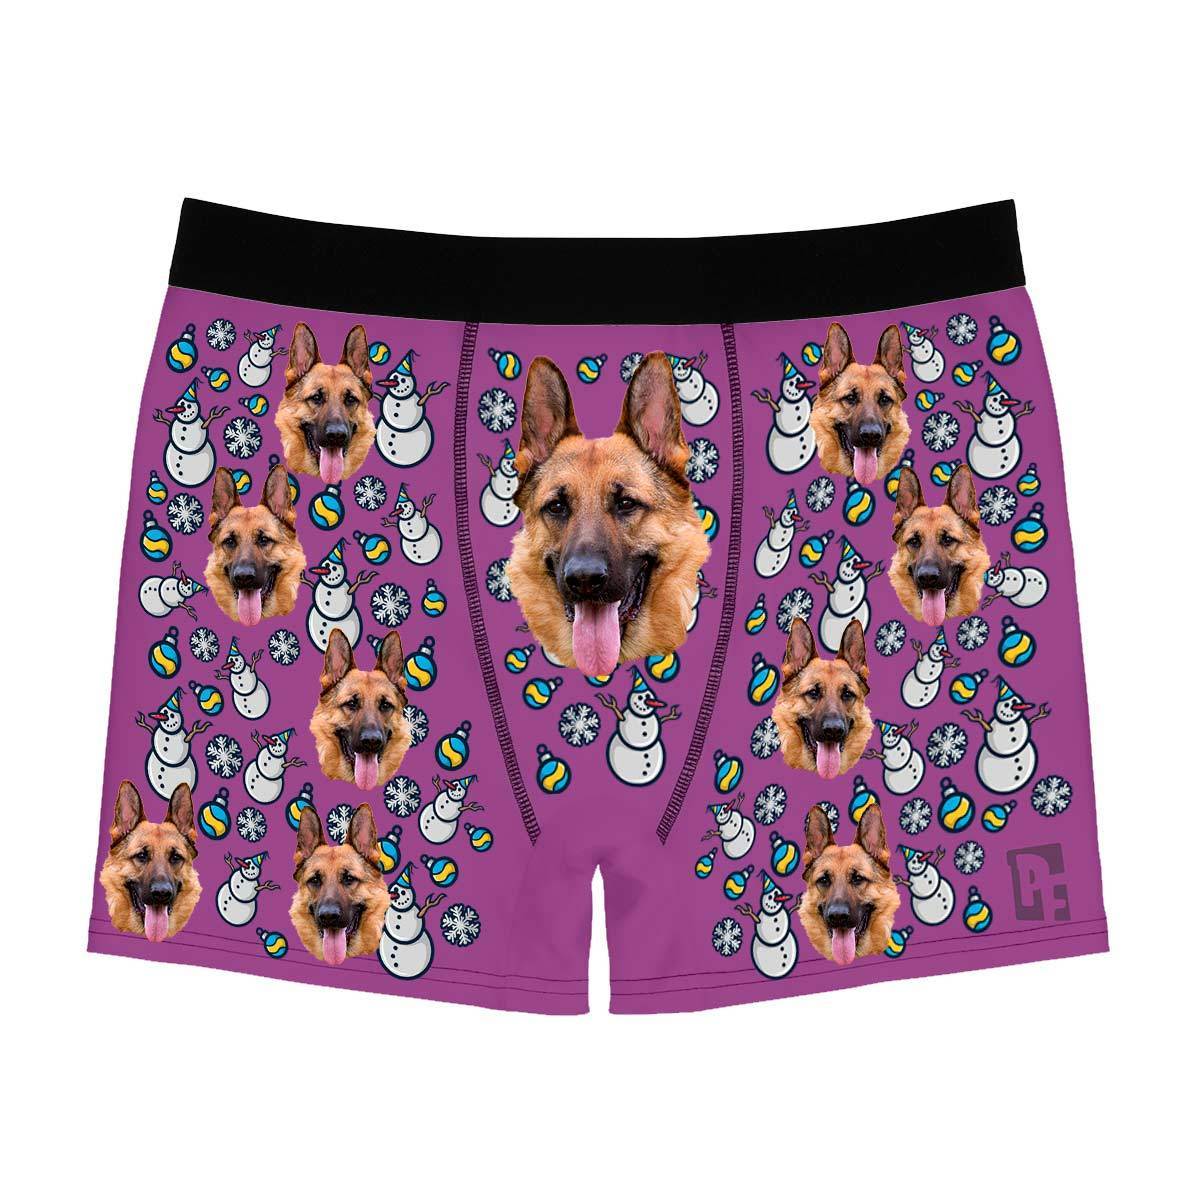 Purple Snowman men's boxer briefs personalized with photo printed on them